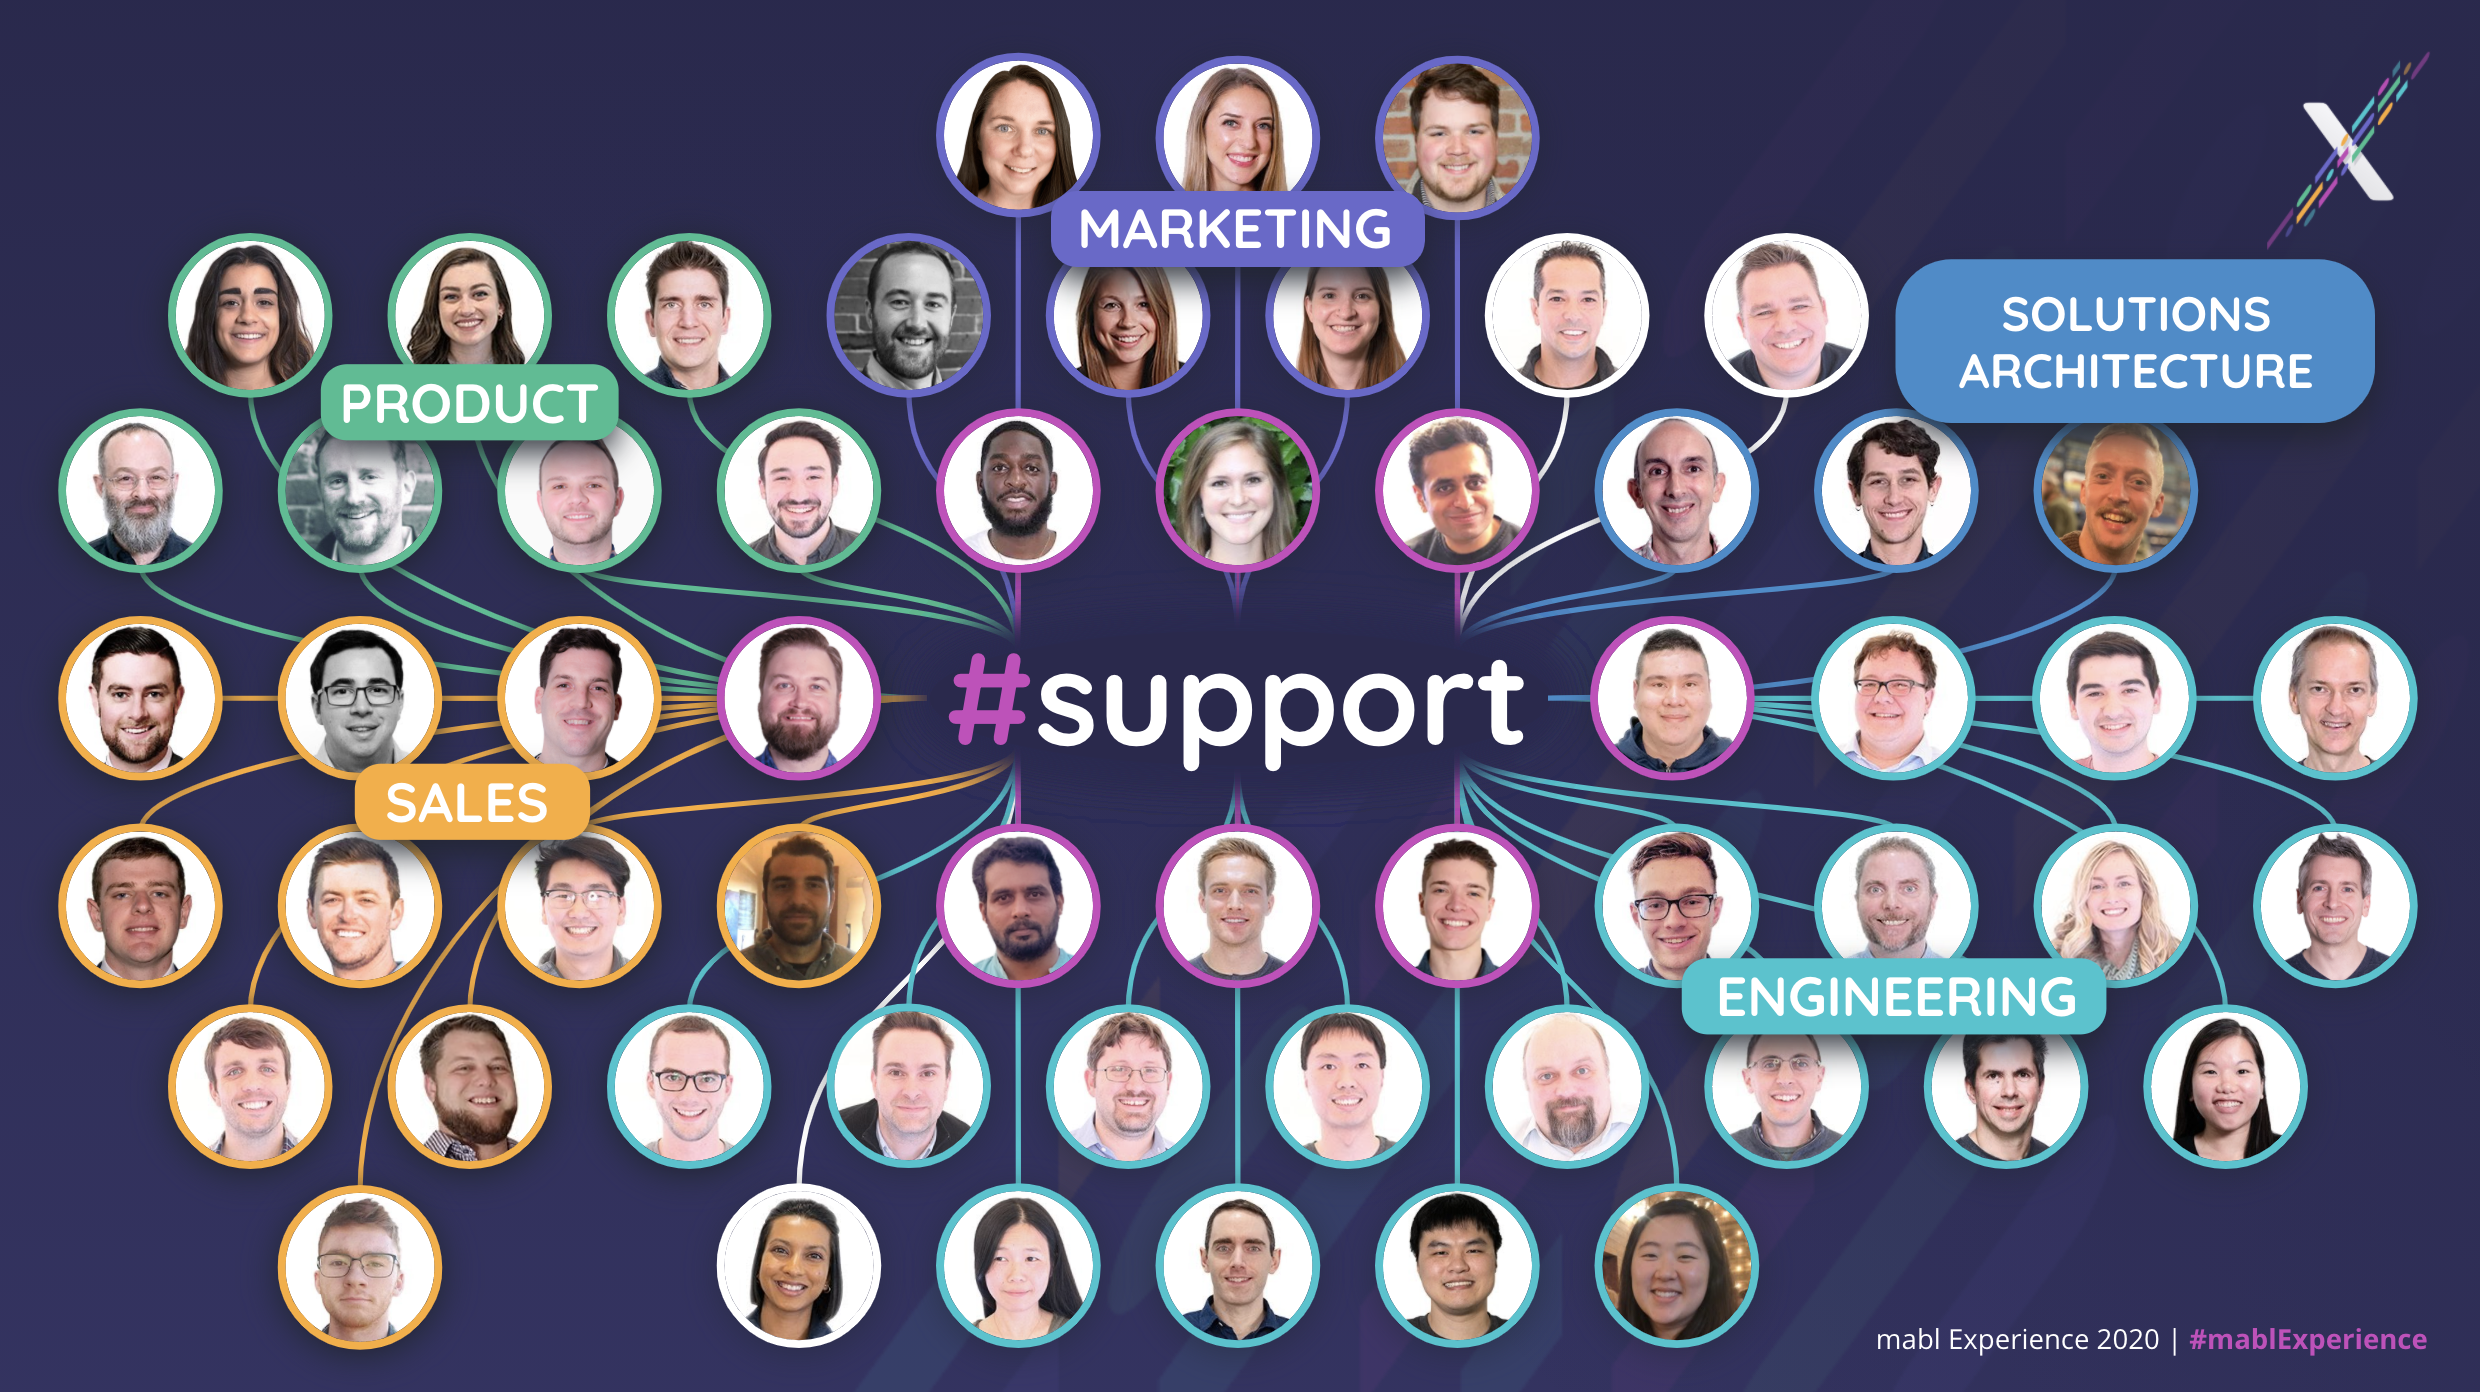 The word support with lines going out to many pictures of employees with labels on each group, like product and marketing.